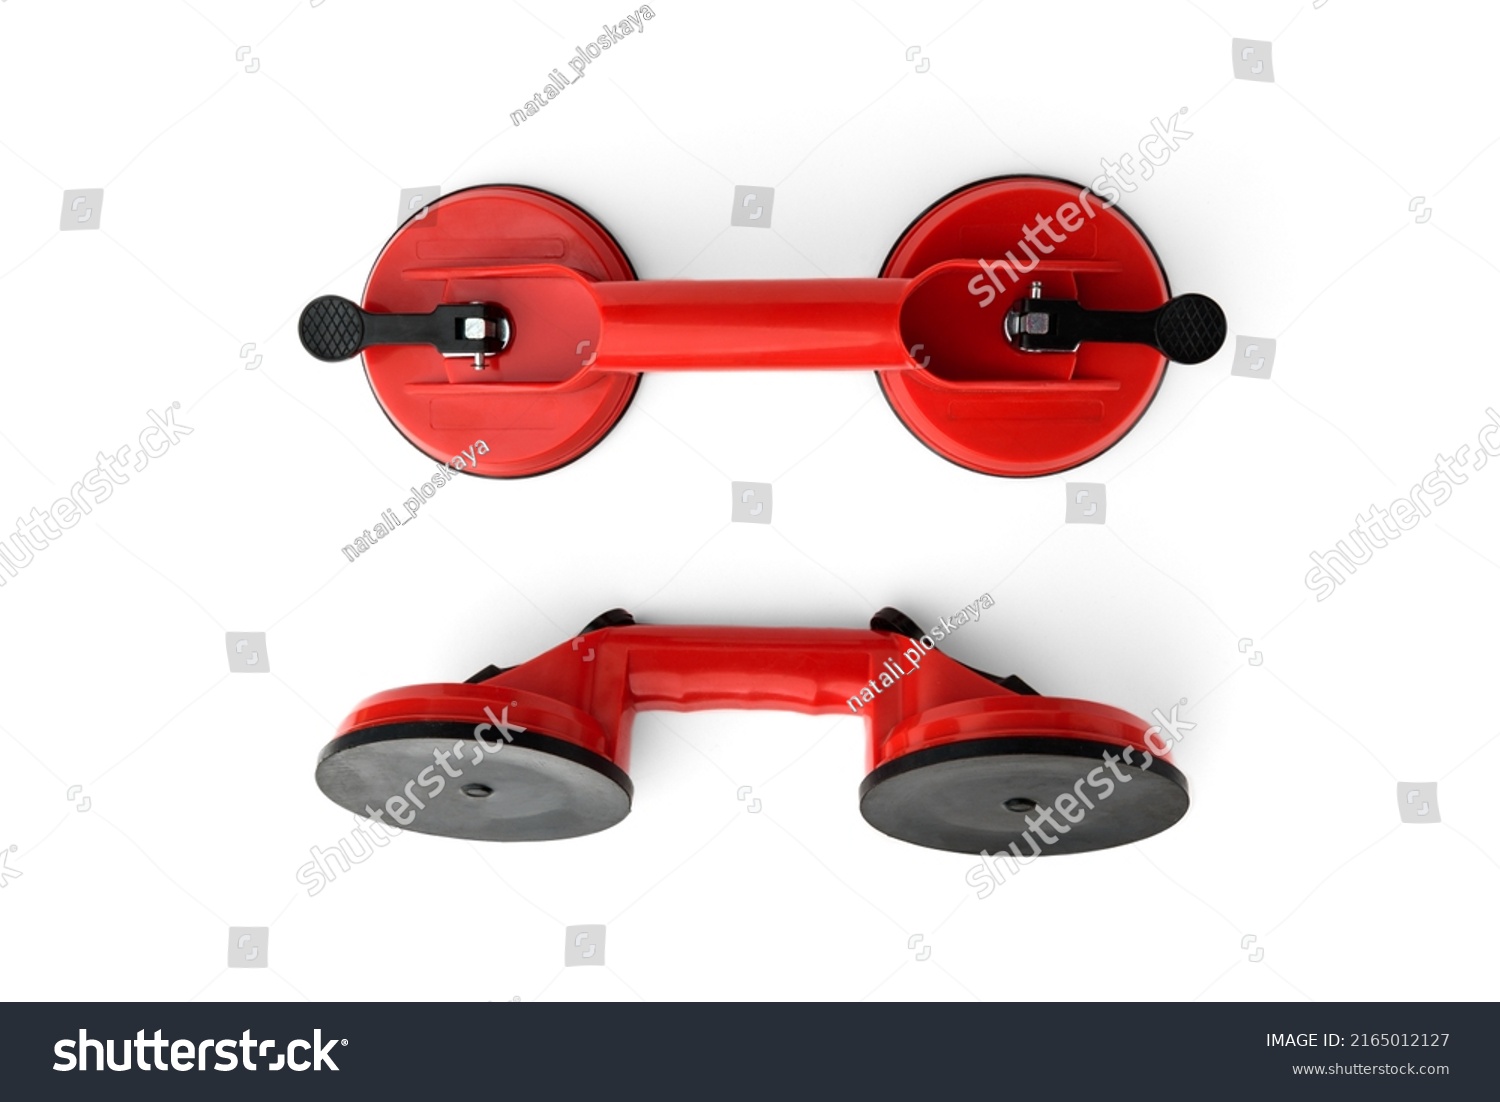 Construction vacuum suction cups for glass and tiles isolated on white background. #2165012127